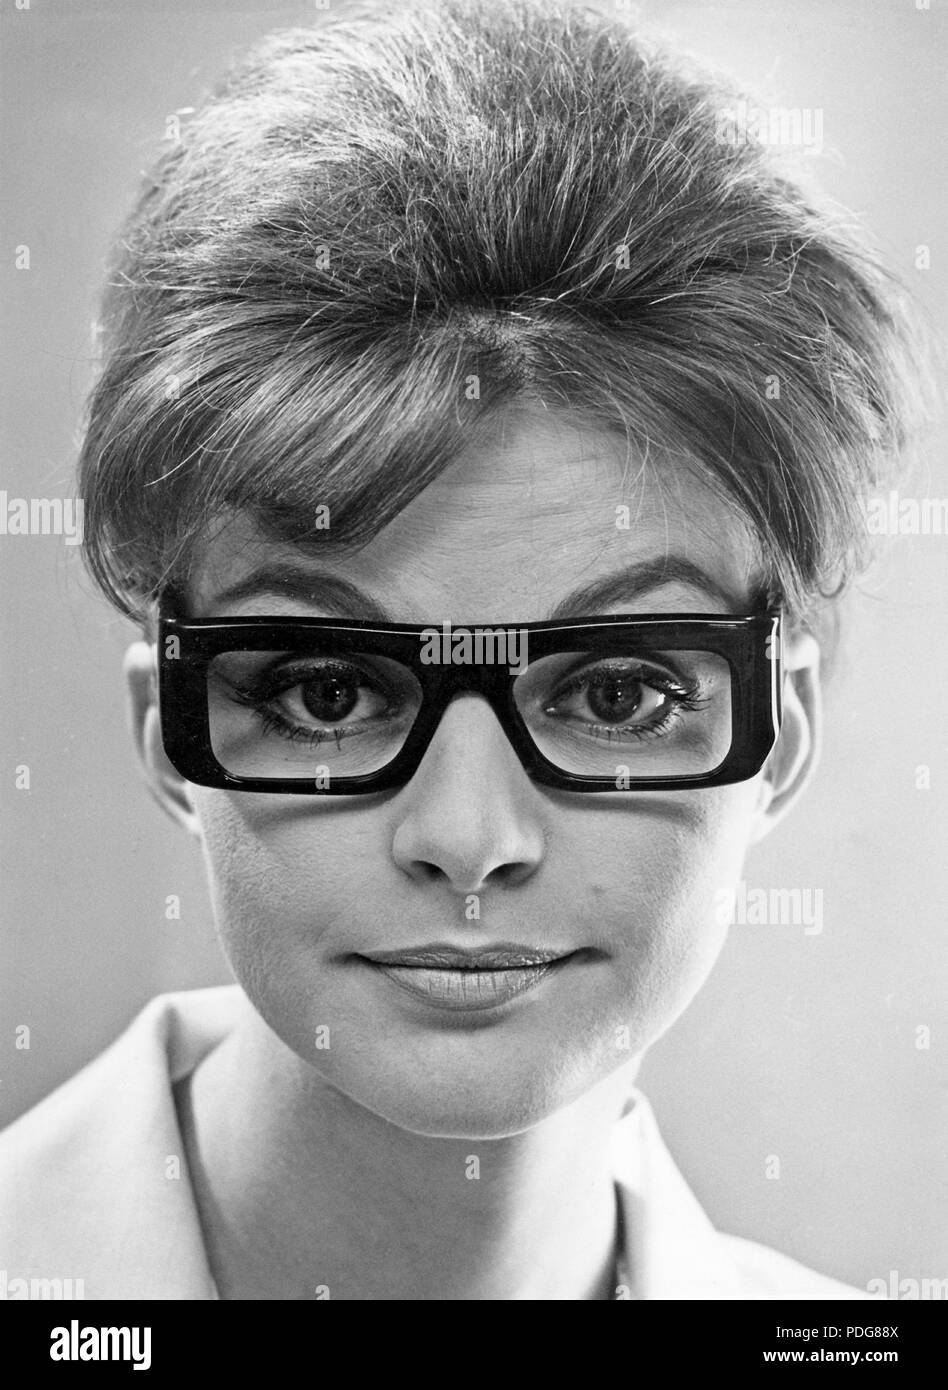 1960s glasses. A young woman in glasses and bows 1963 Stock Photo - Alamy